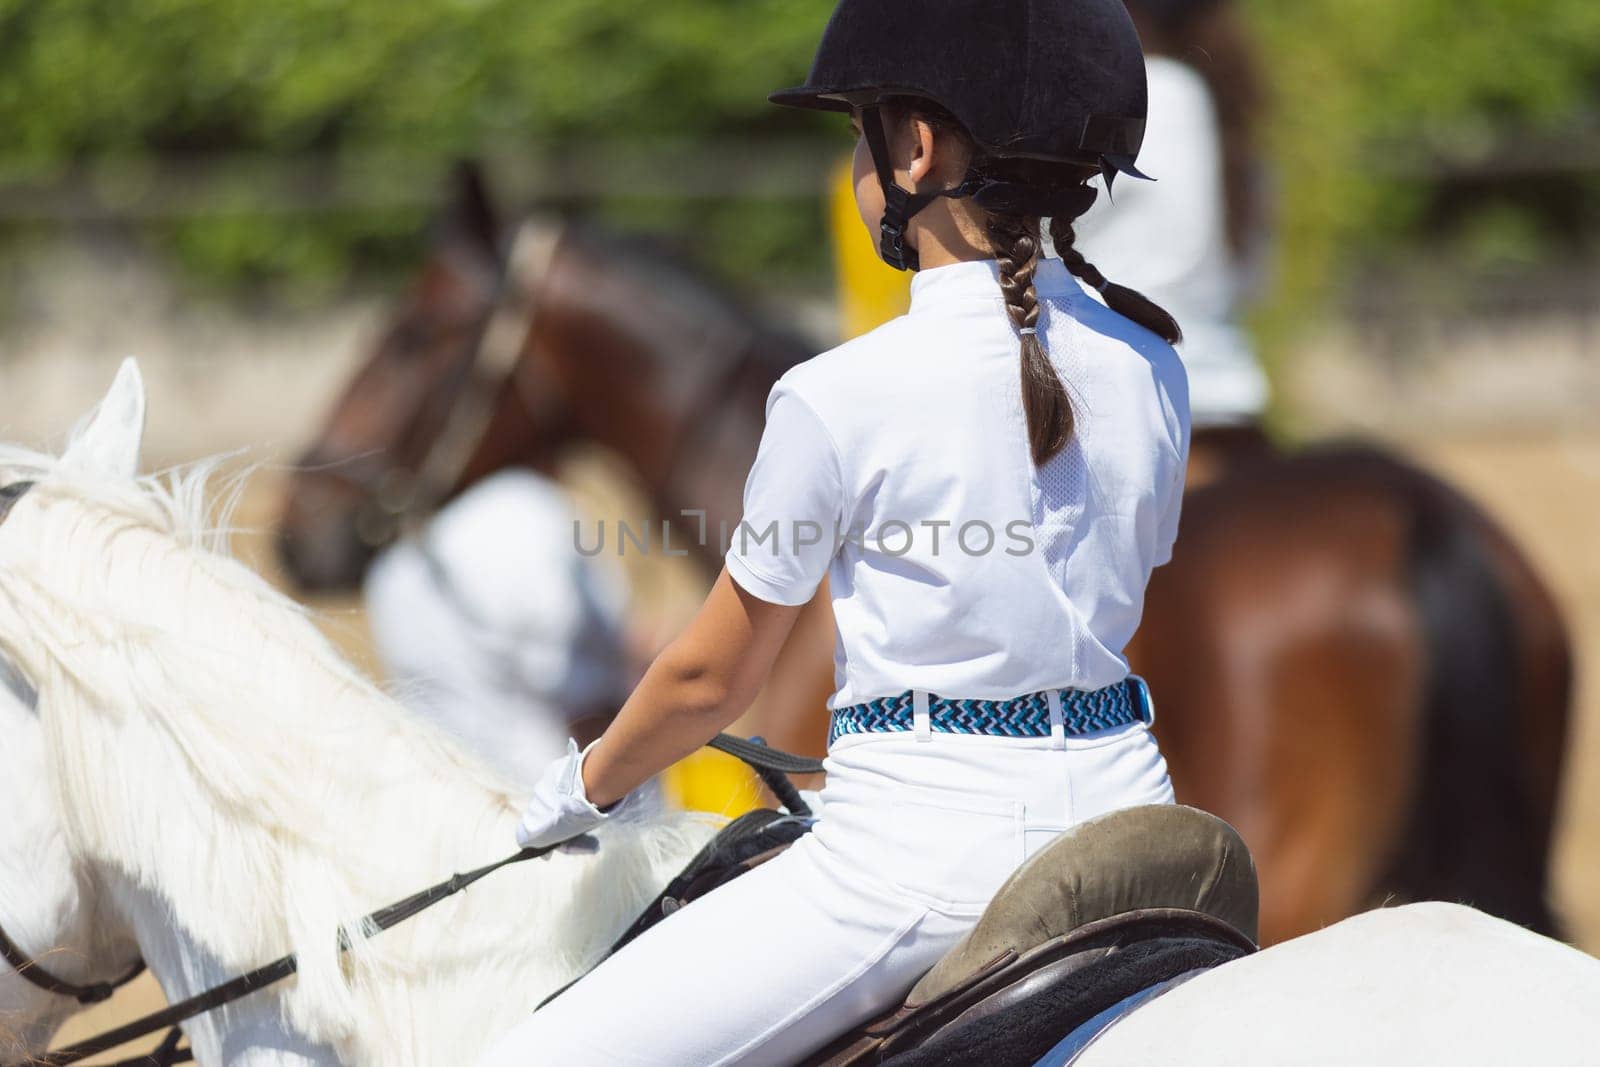 Equestrian sport - a little girl on a horseback at the ranch. Mid shot